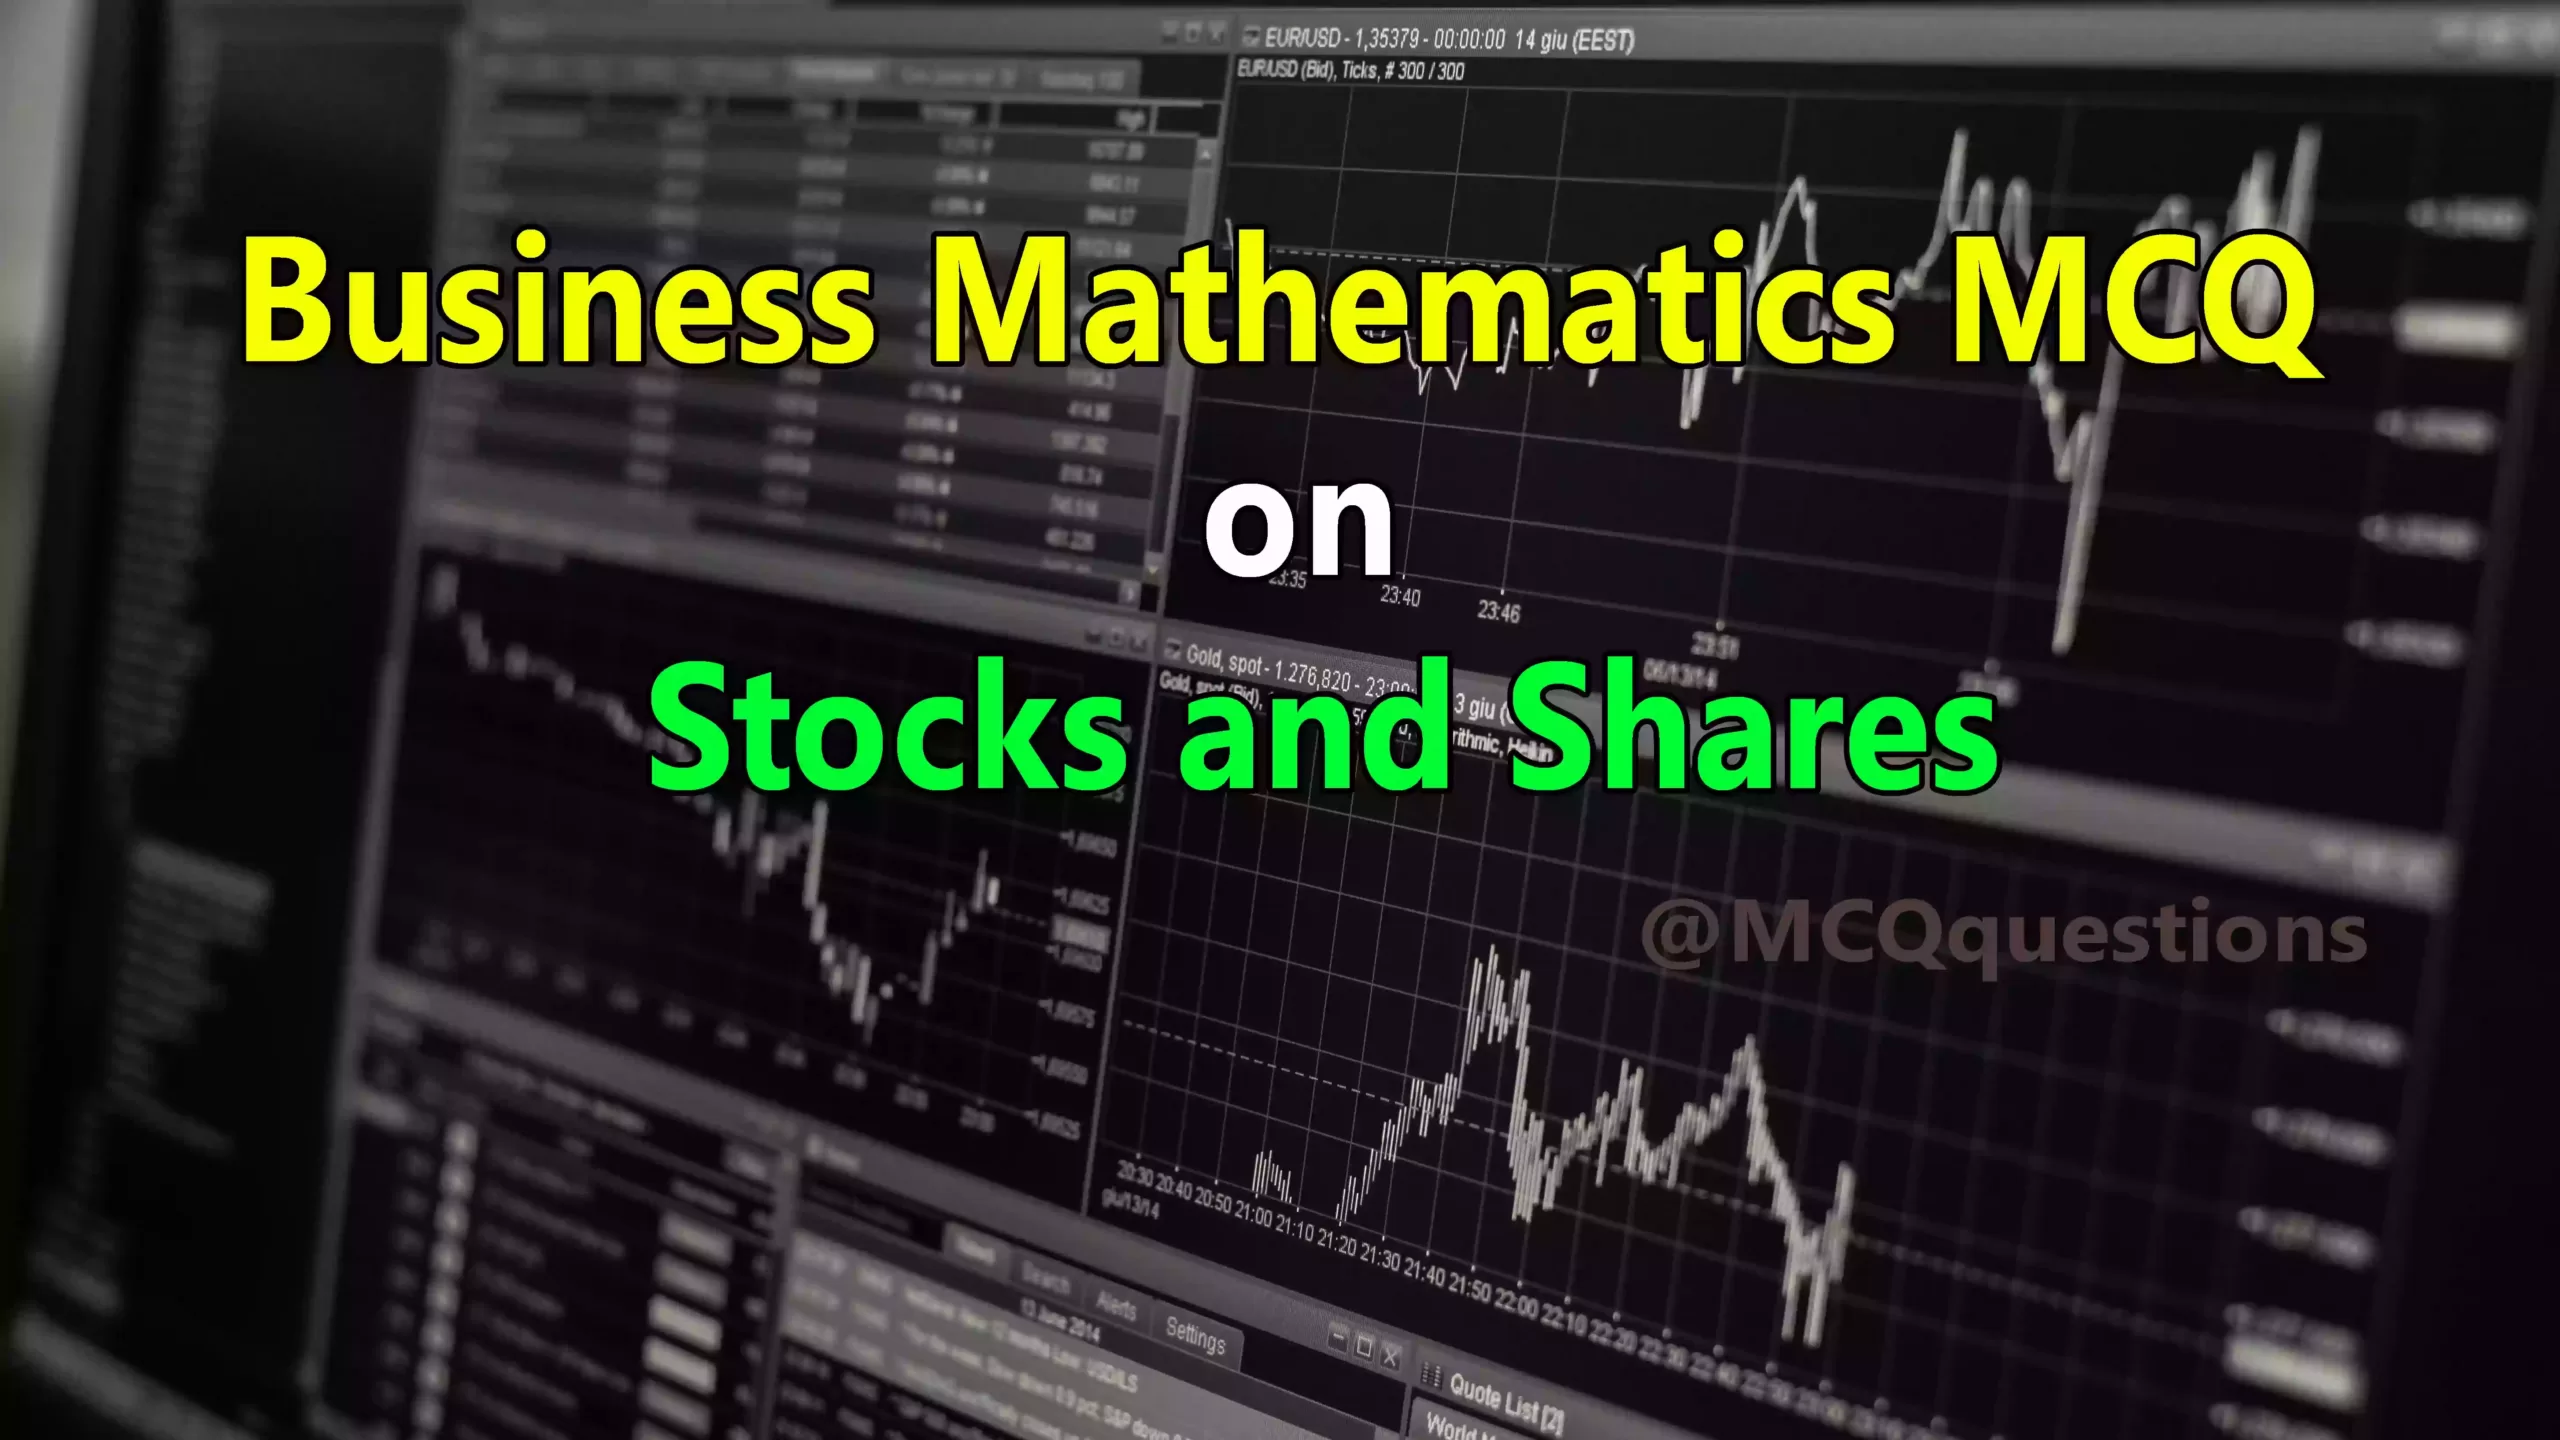 MCQ on Stocks and Shares